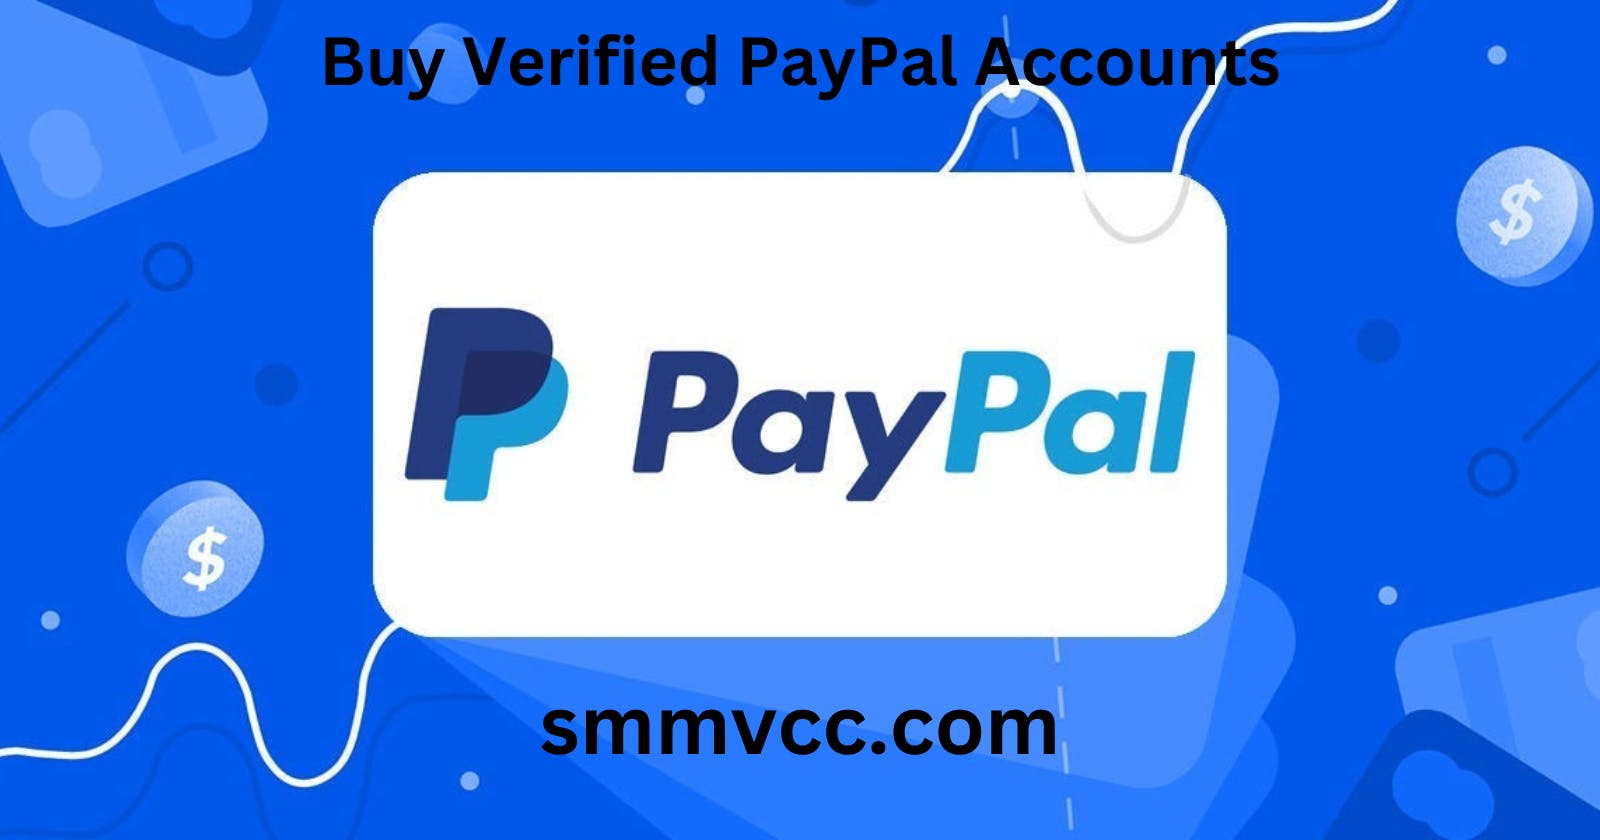 The Ultimate Guide to Purchasing Verified Paypal Accounts